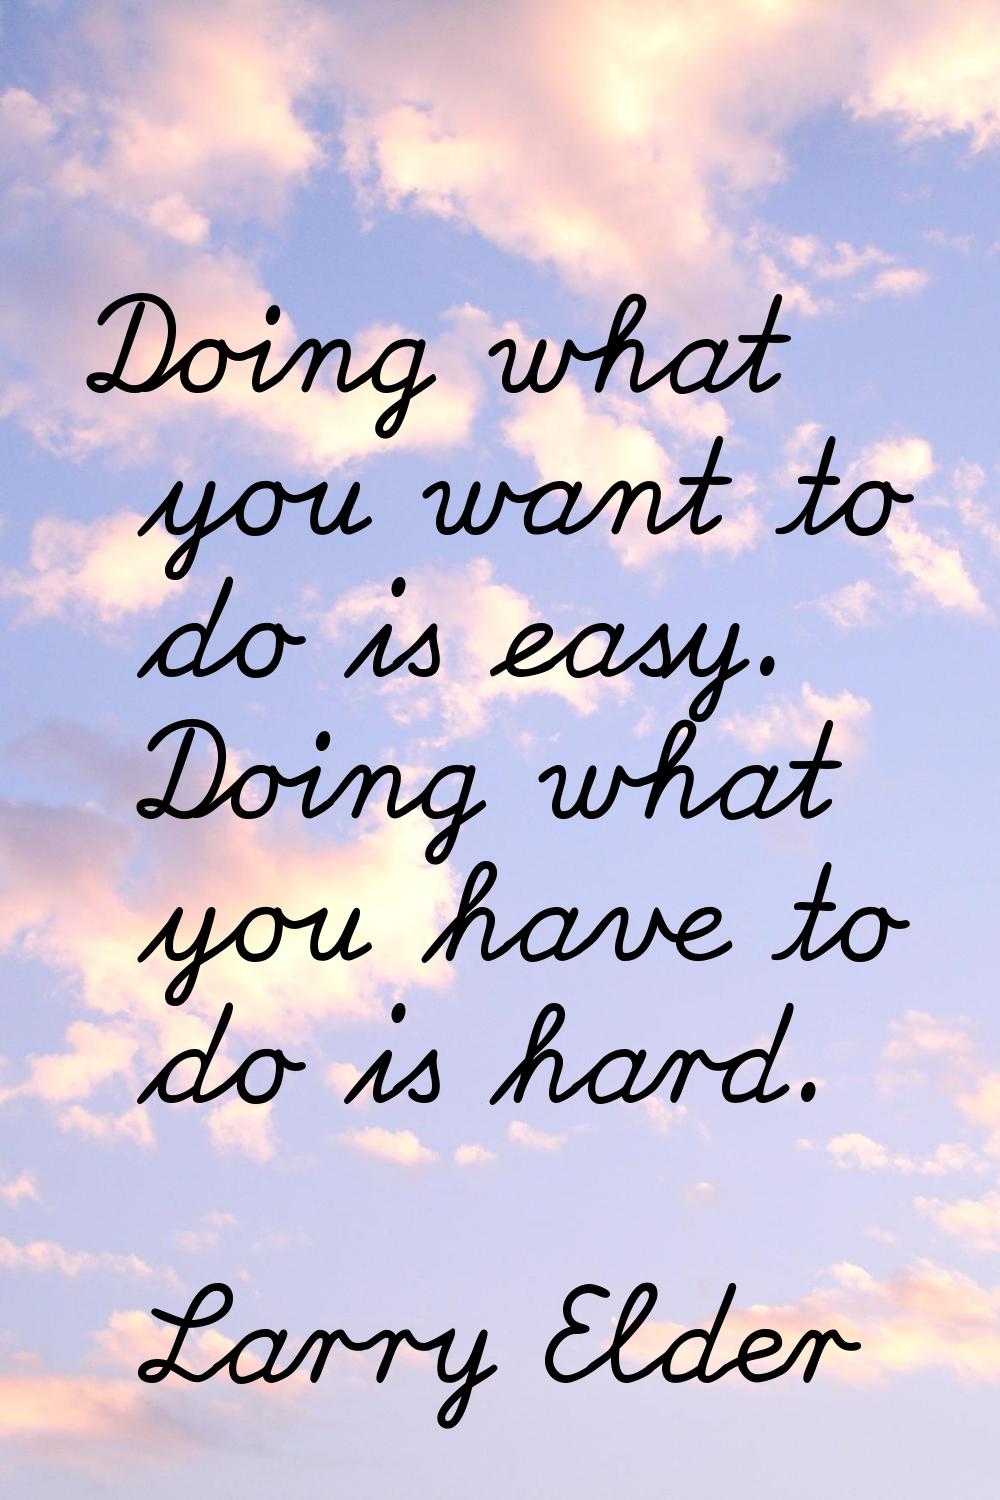 Doing what you want to do is easy. Doing what you have to do is hard.